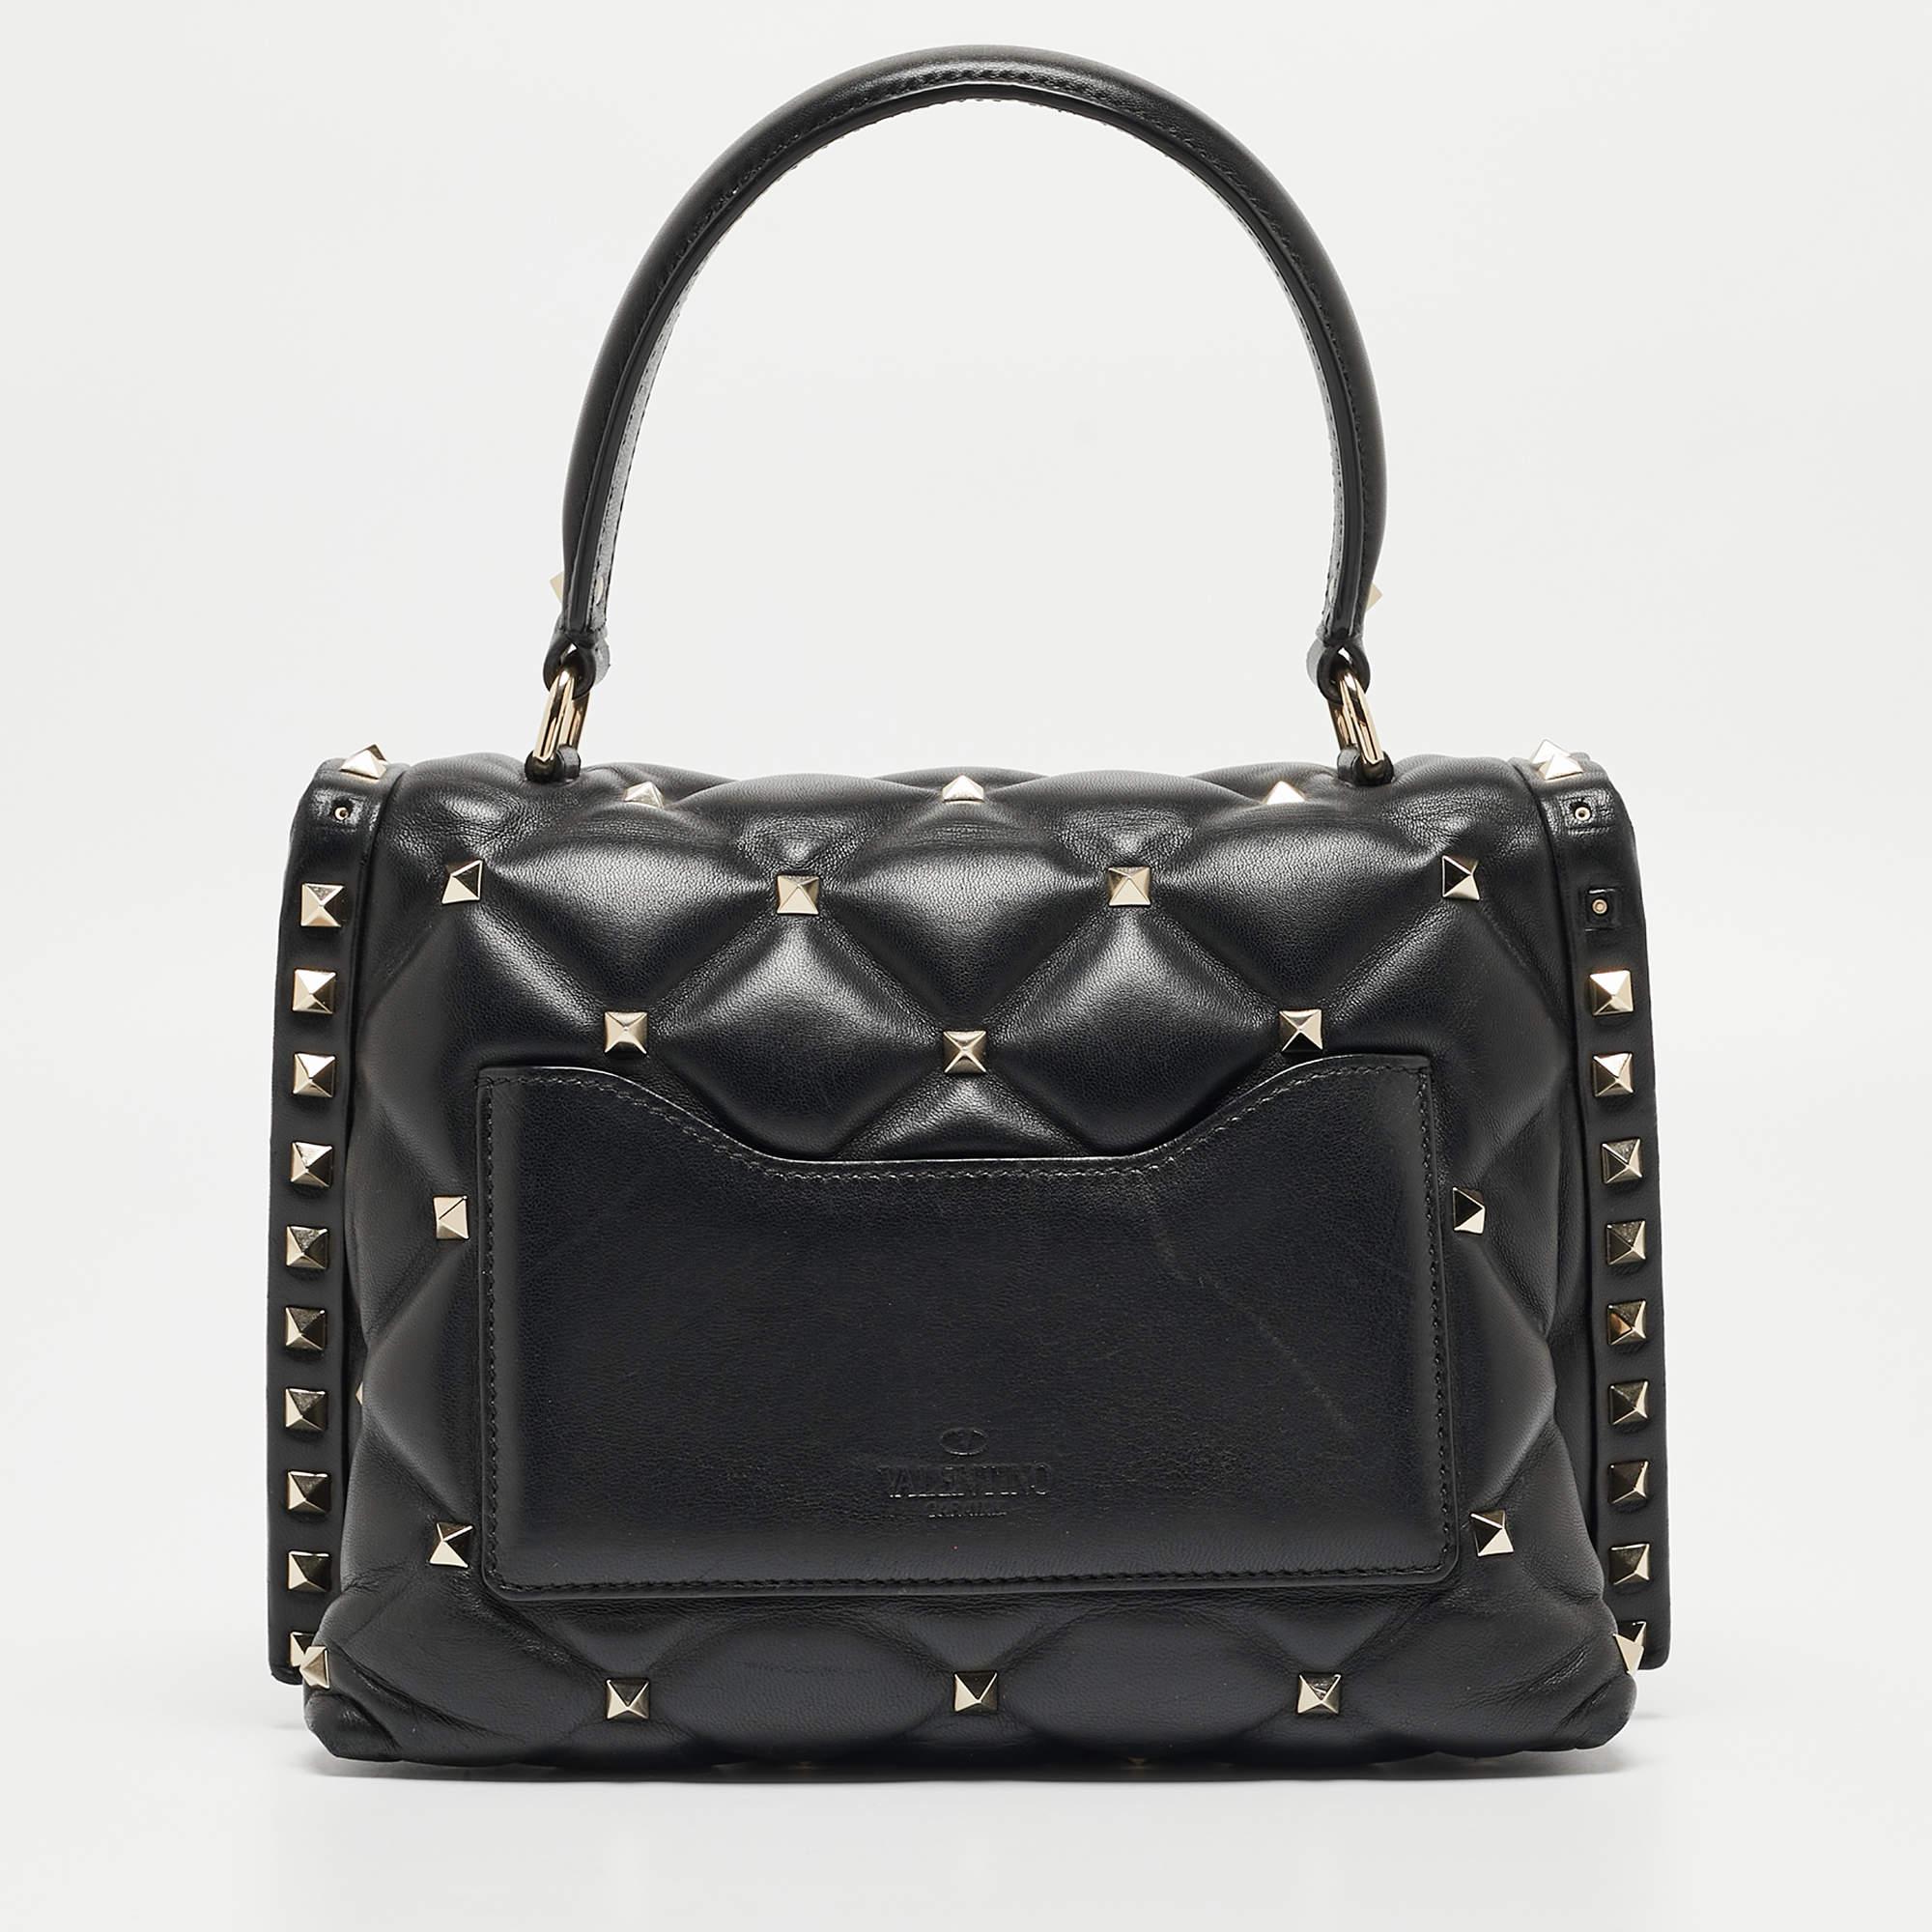 Ensure your day's essentials are in order and your outfit is complete with this Valentino bag. Crafted using the best materials, the bag carries the maison's signature of artful craftsmanship and enduring appeal.

Includes: Detachable Strap, Extra